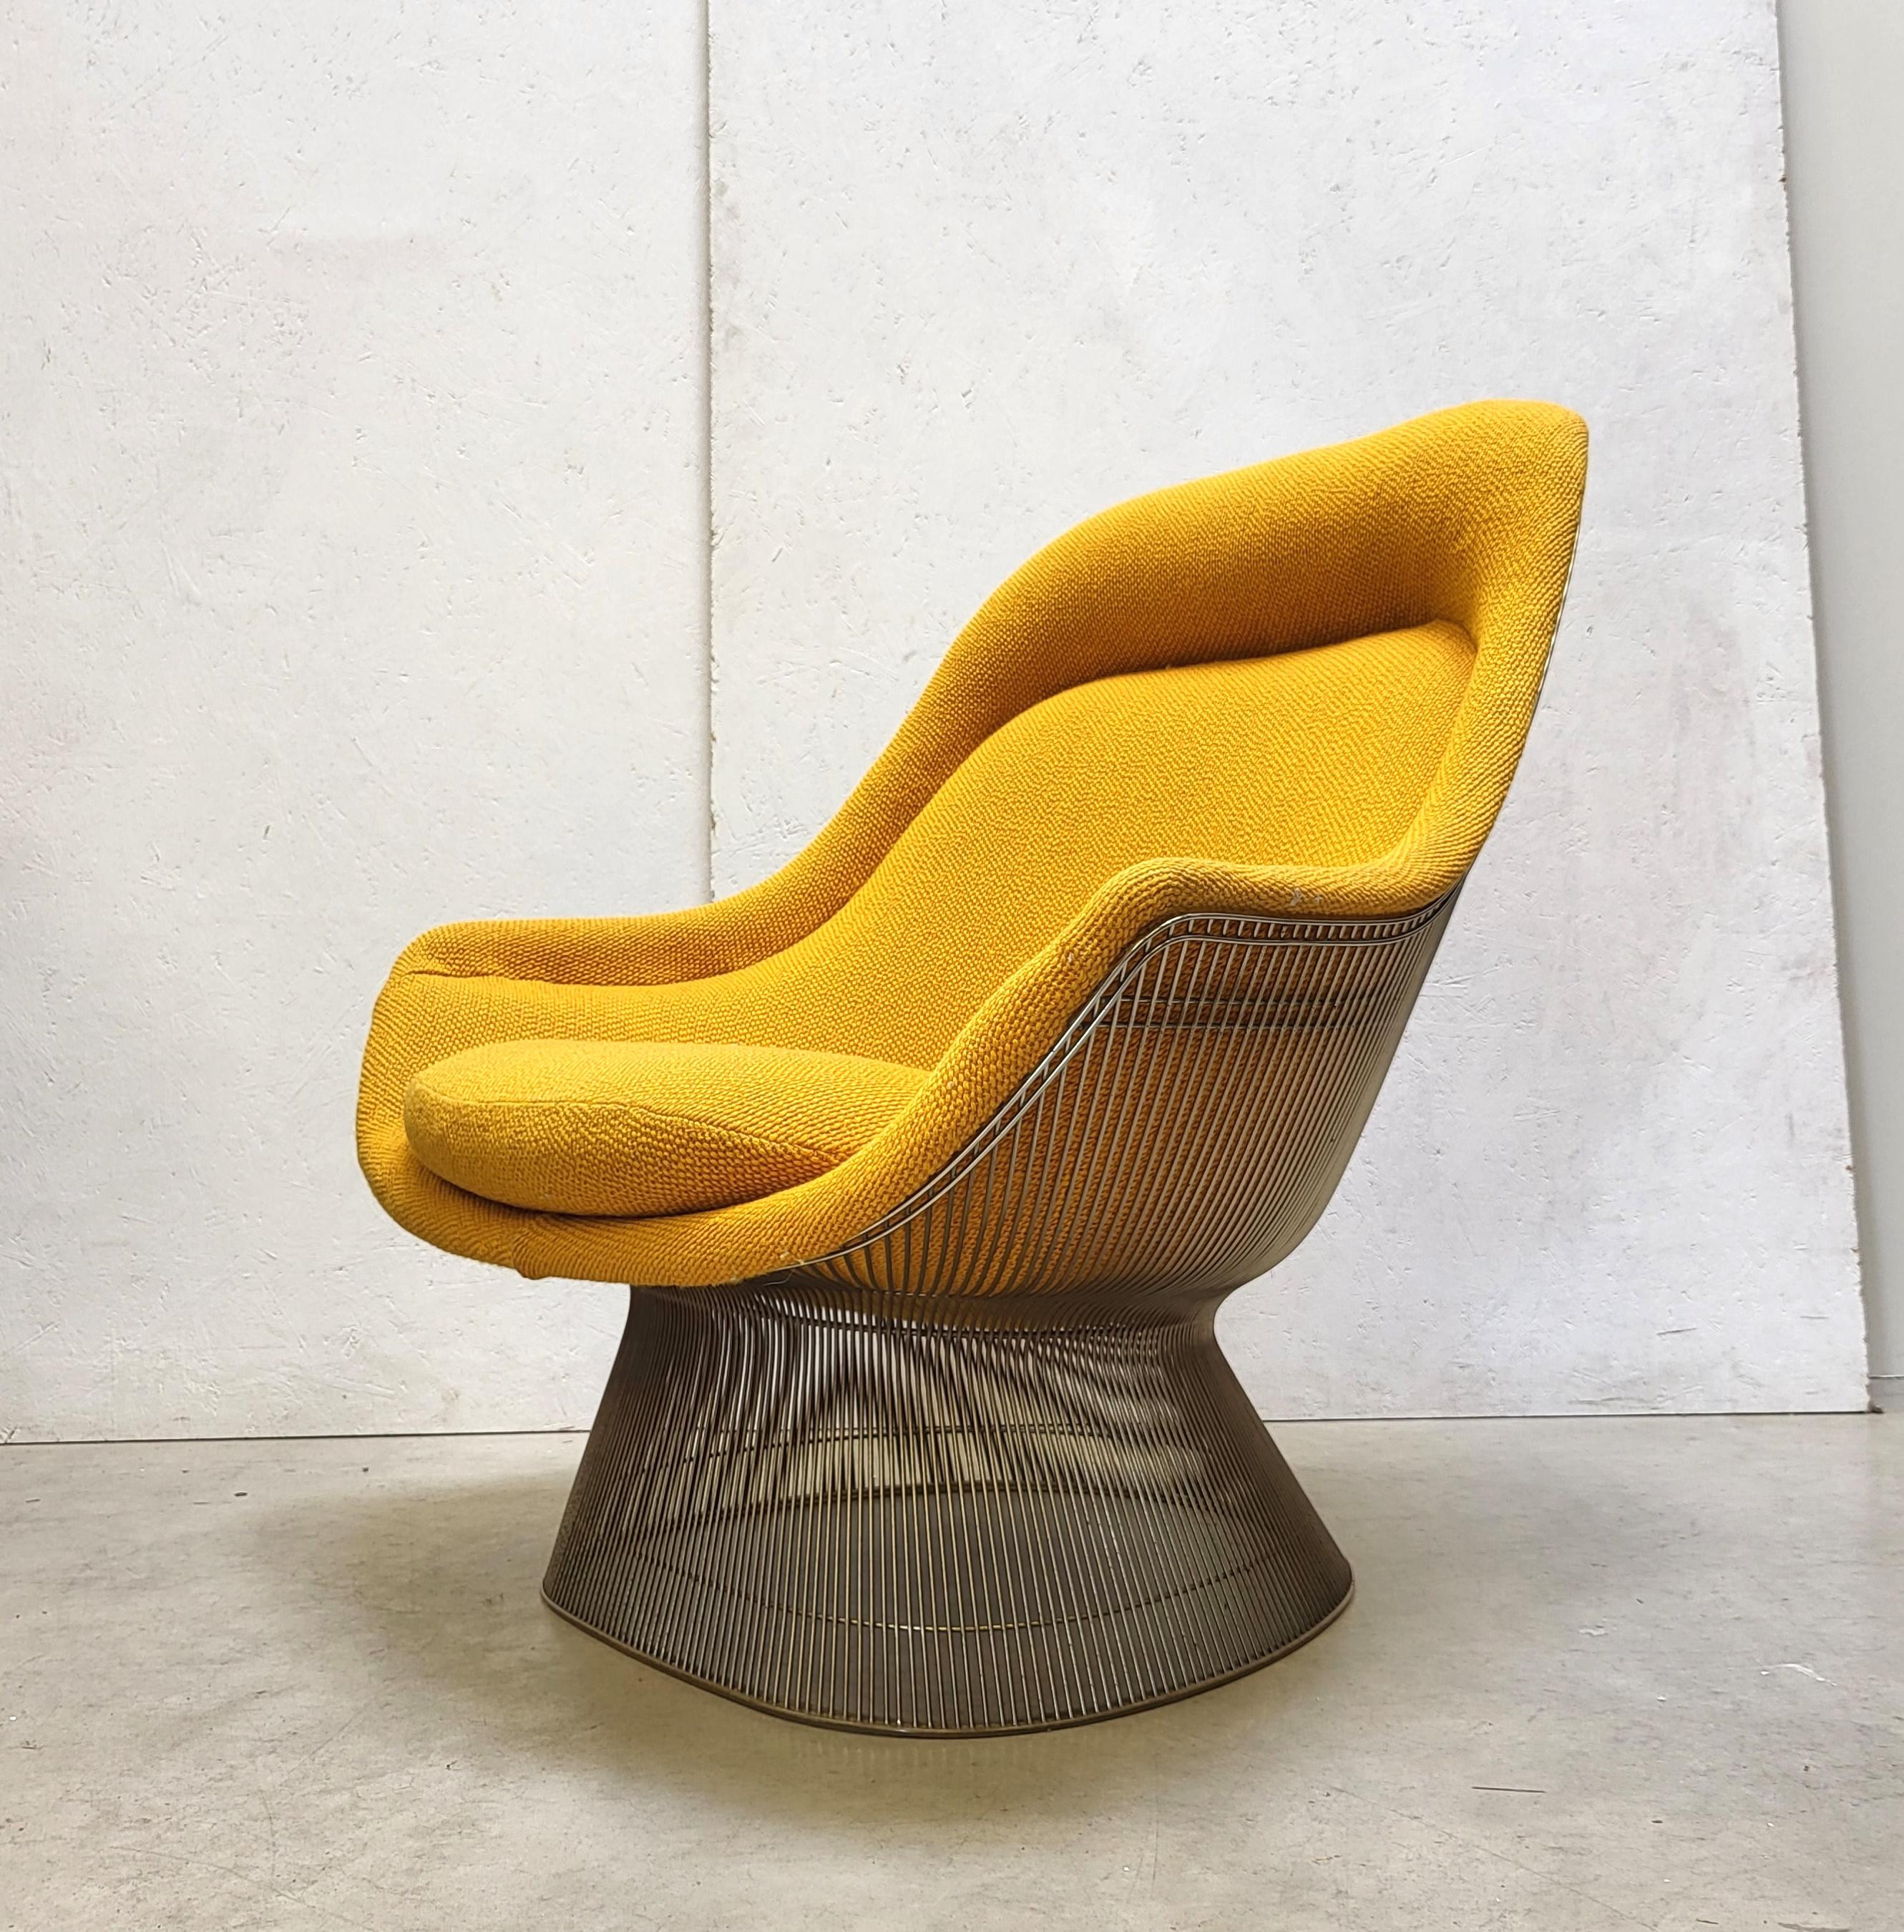 Hand-Crafted Mustard Warren Platner Easy Lounge Chair for Knoll, 1980s